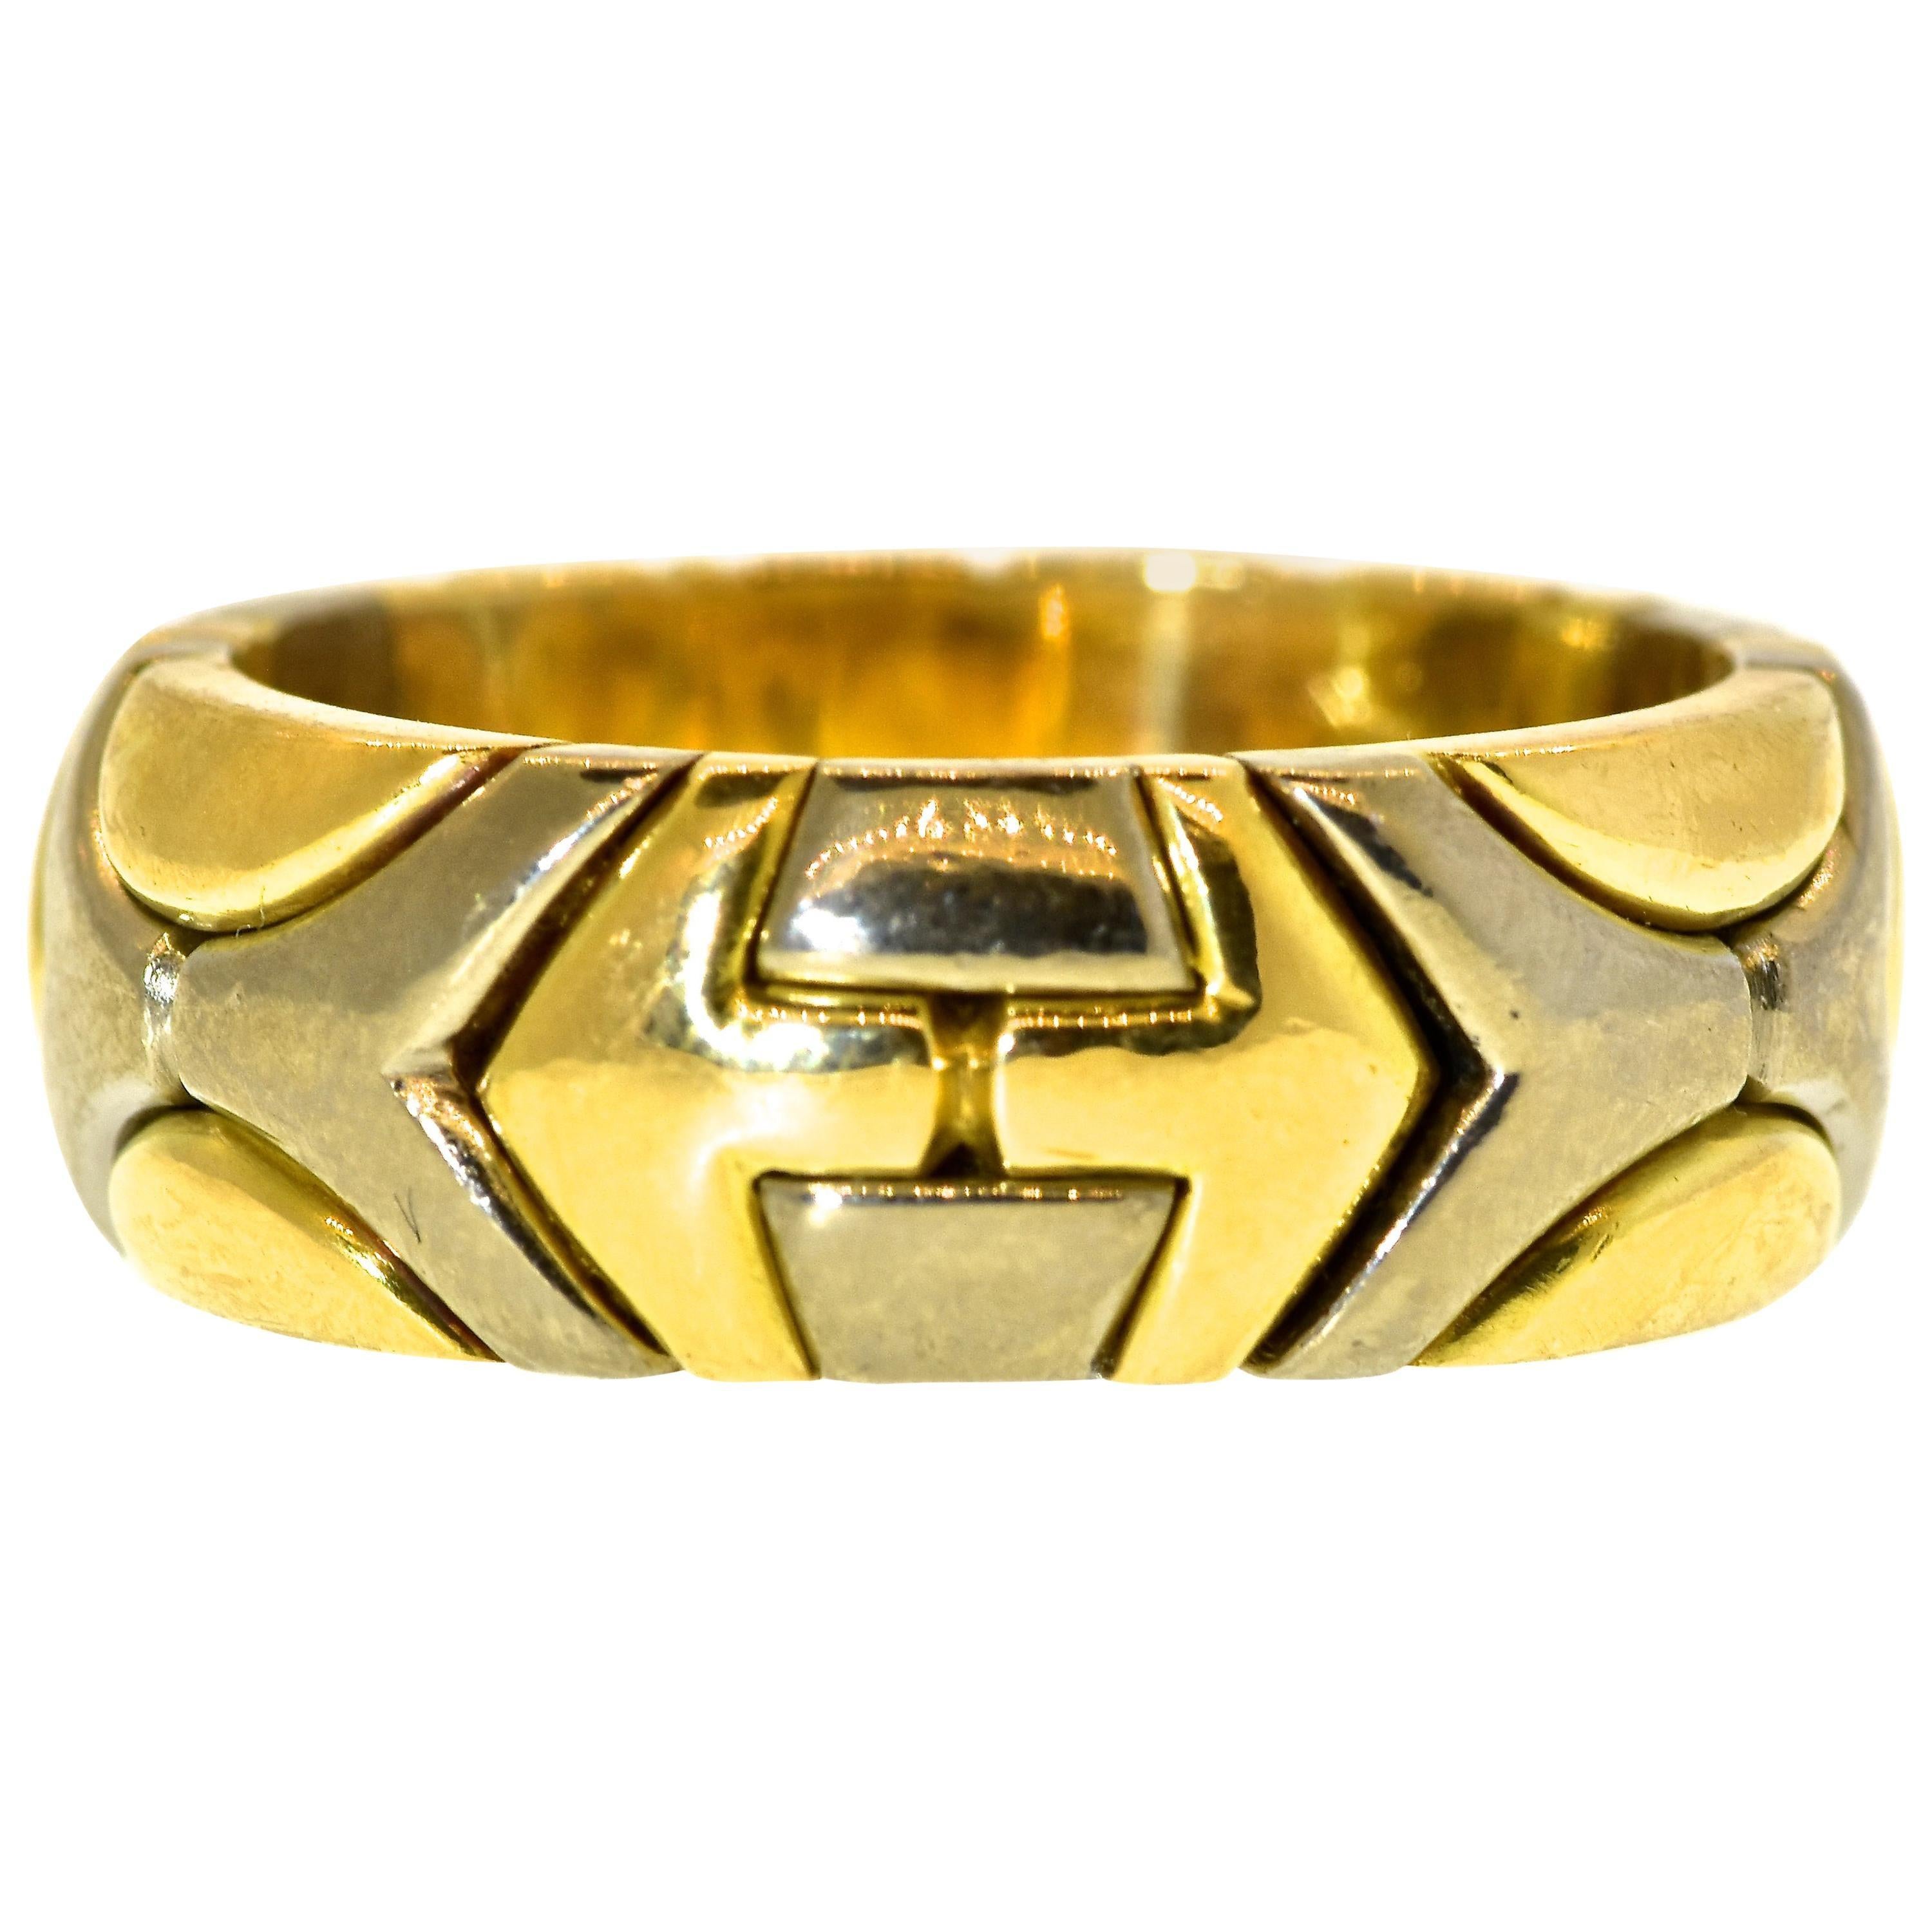 Contemporary 18K Yellow Gold and Darkened Steel Vintage Band Ring, Italy, c. 1990.